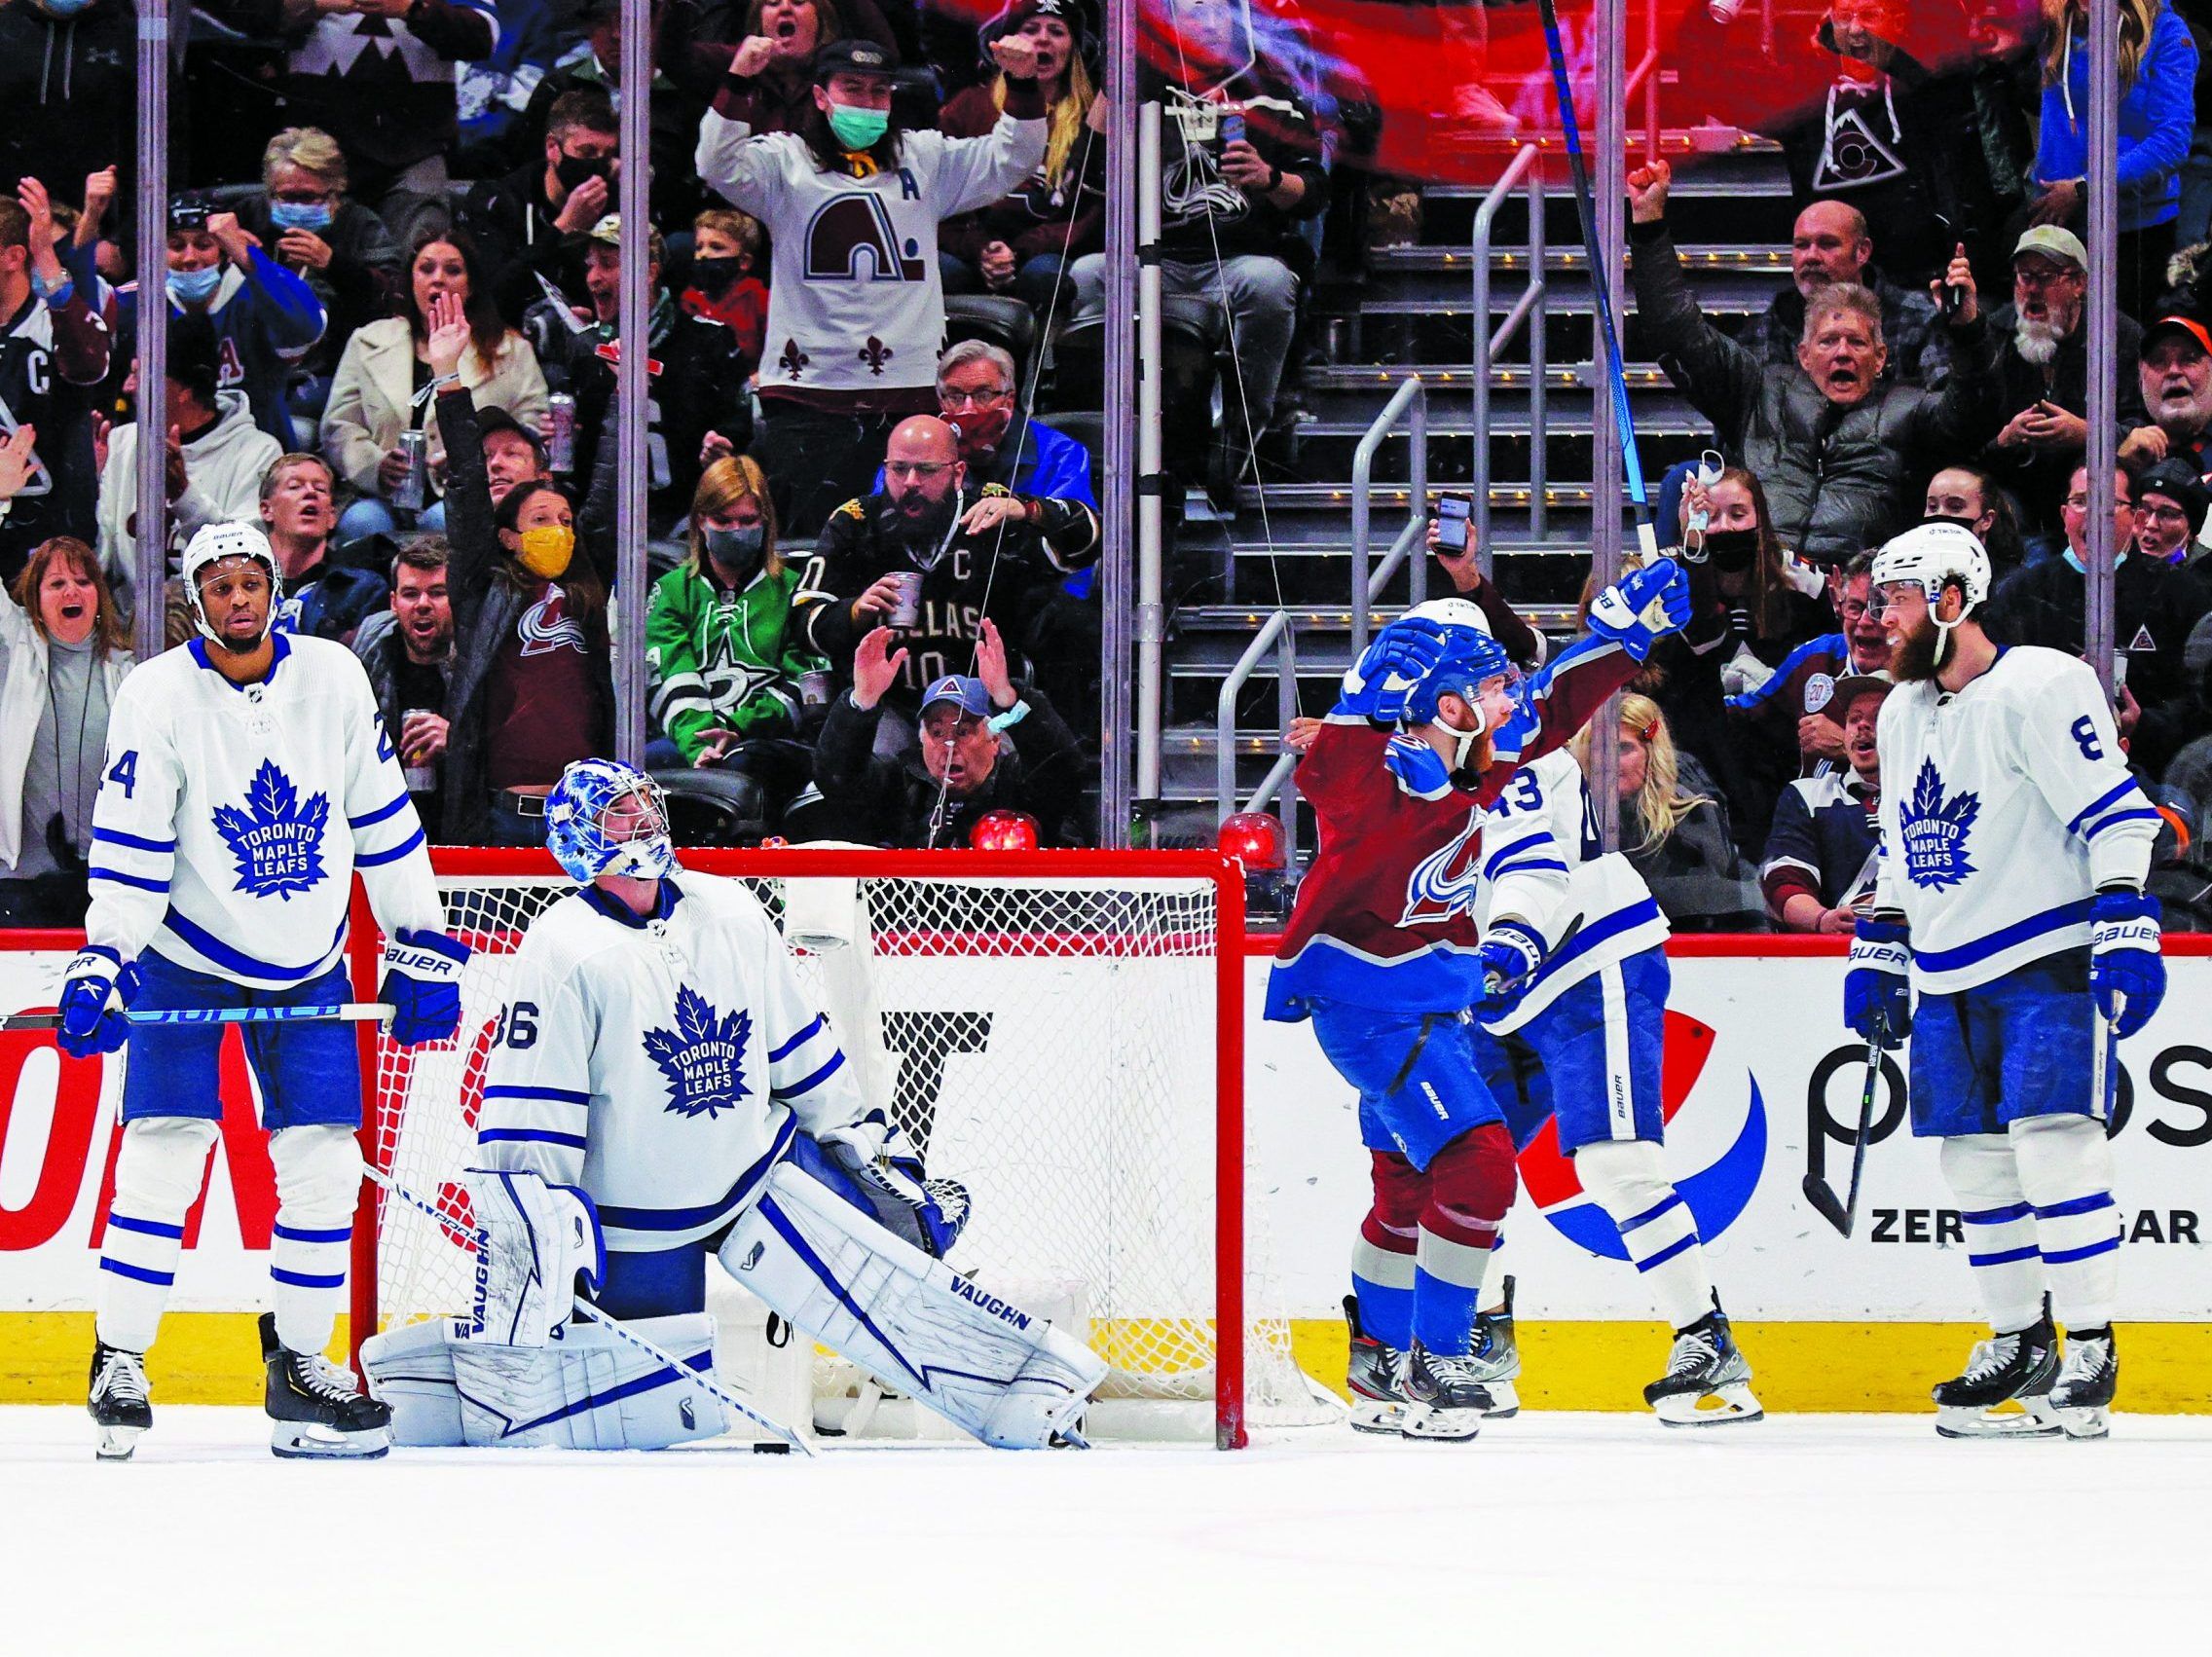 Maple Leafs fall to Avalanche in OT after blowing 3-goal lead